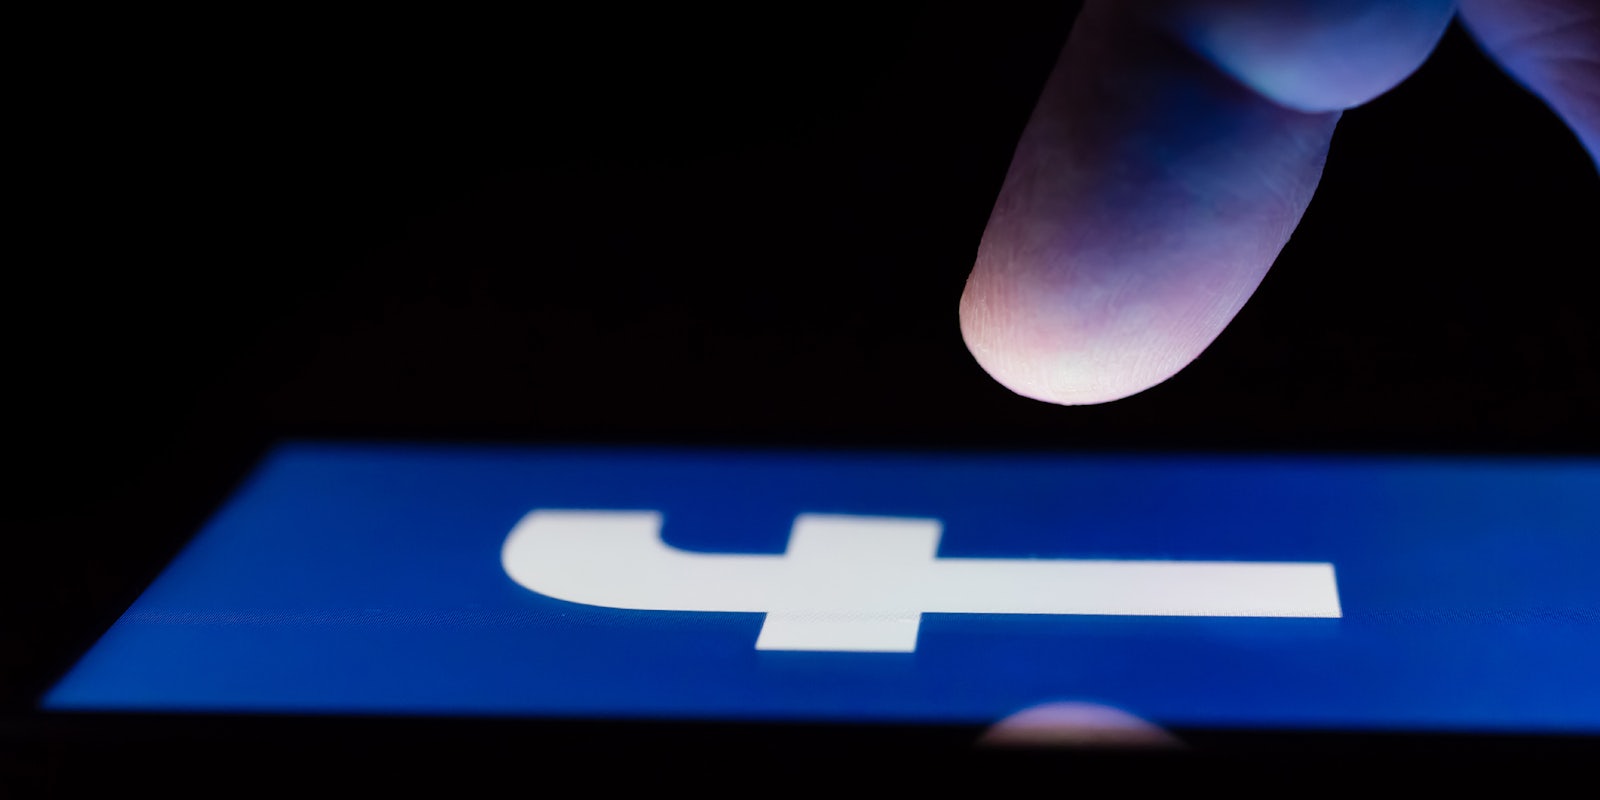 A person touching the Facebook logo on a smartphone in the dark.